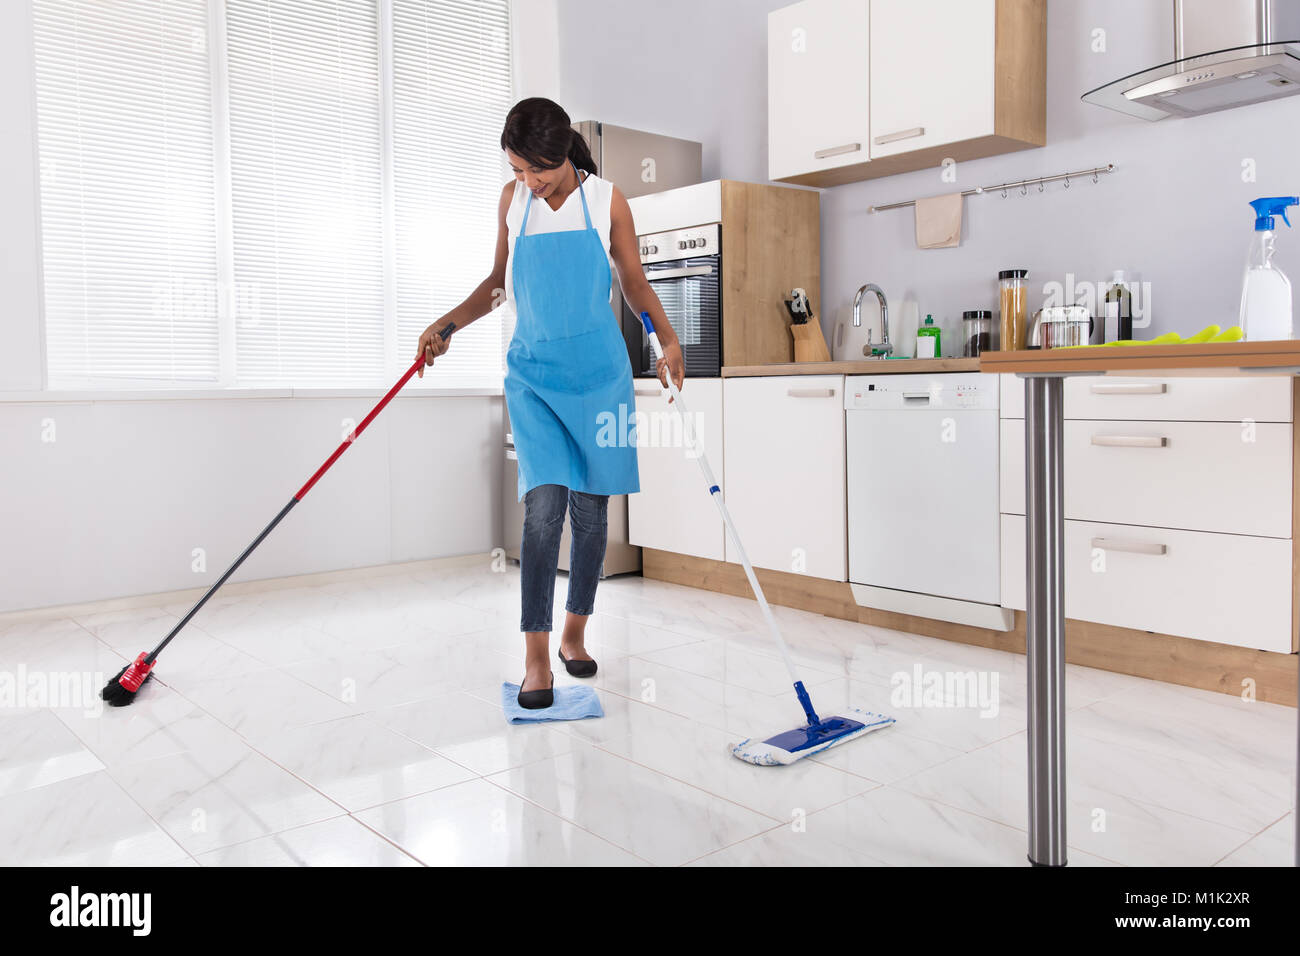 Housewife Doing Multitasking Household Work By Sweeping And Mopping In Kitchen Stock Photo